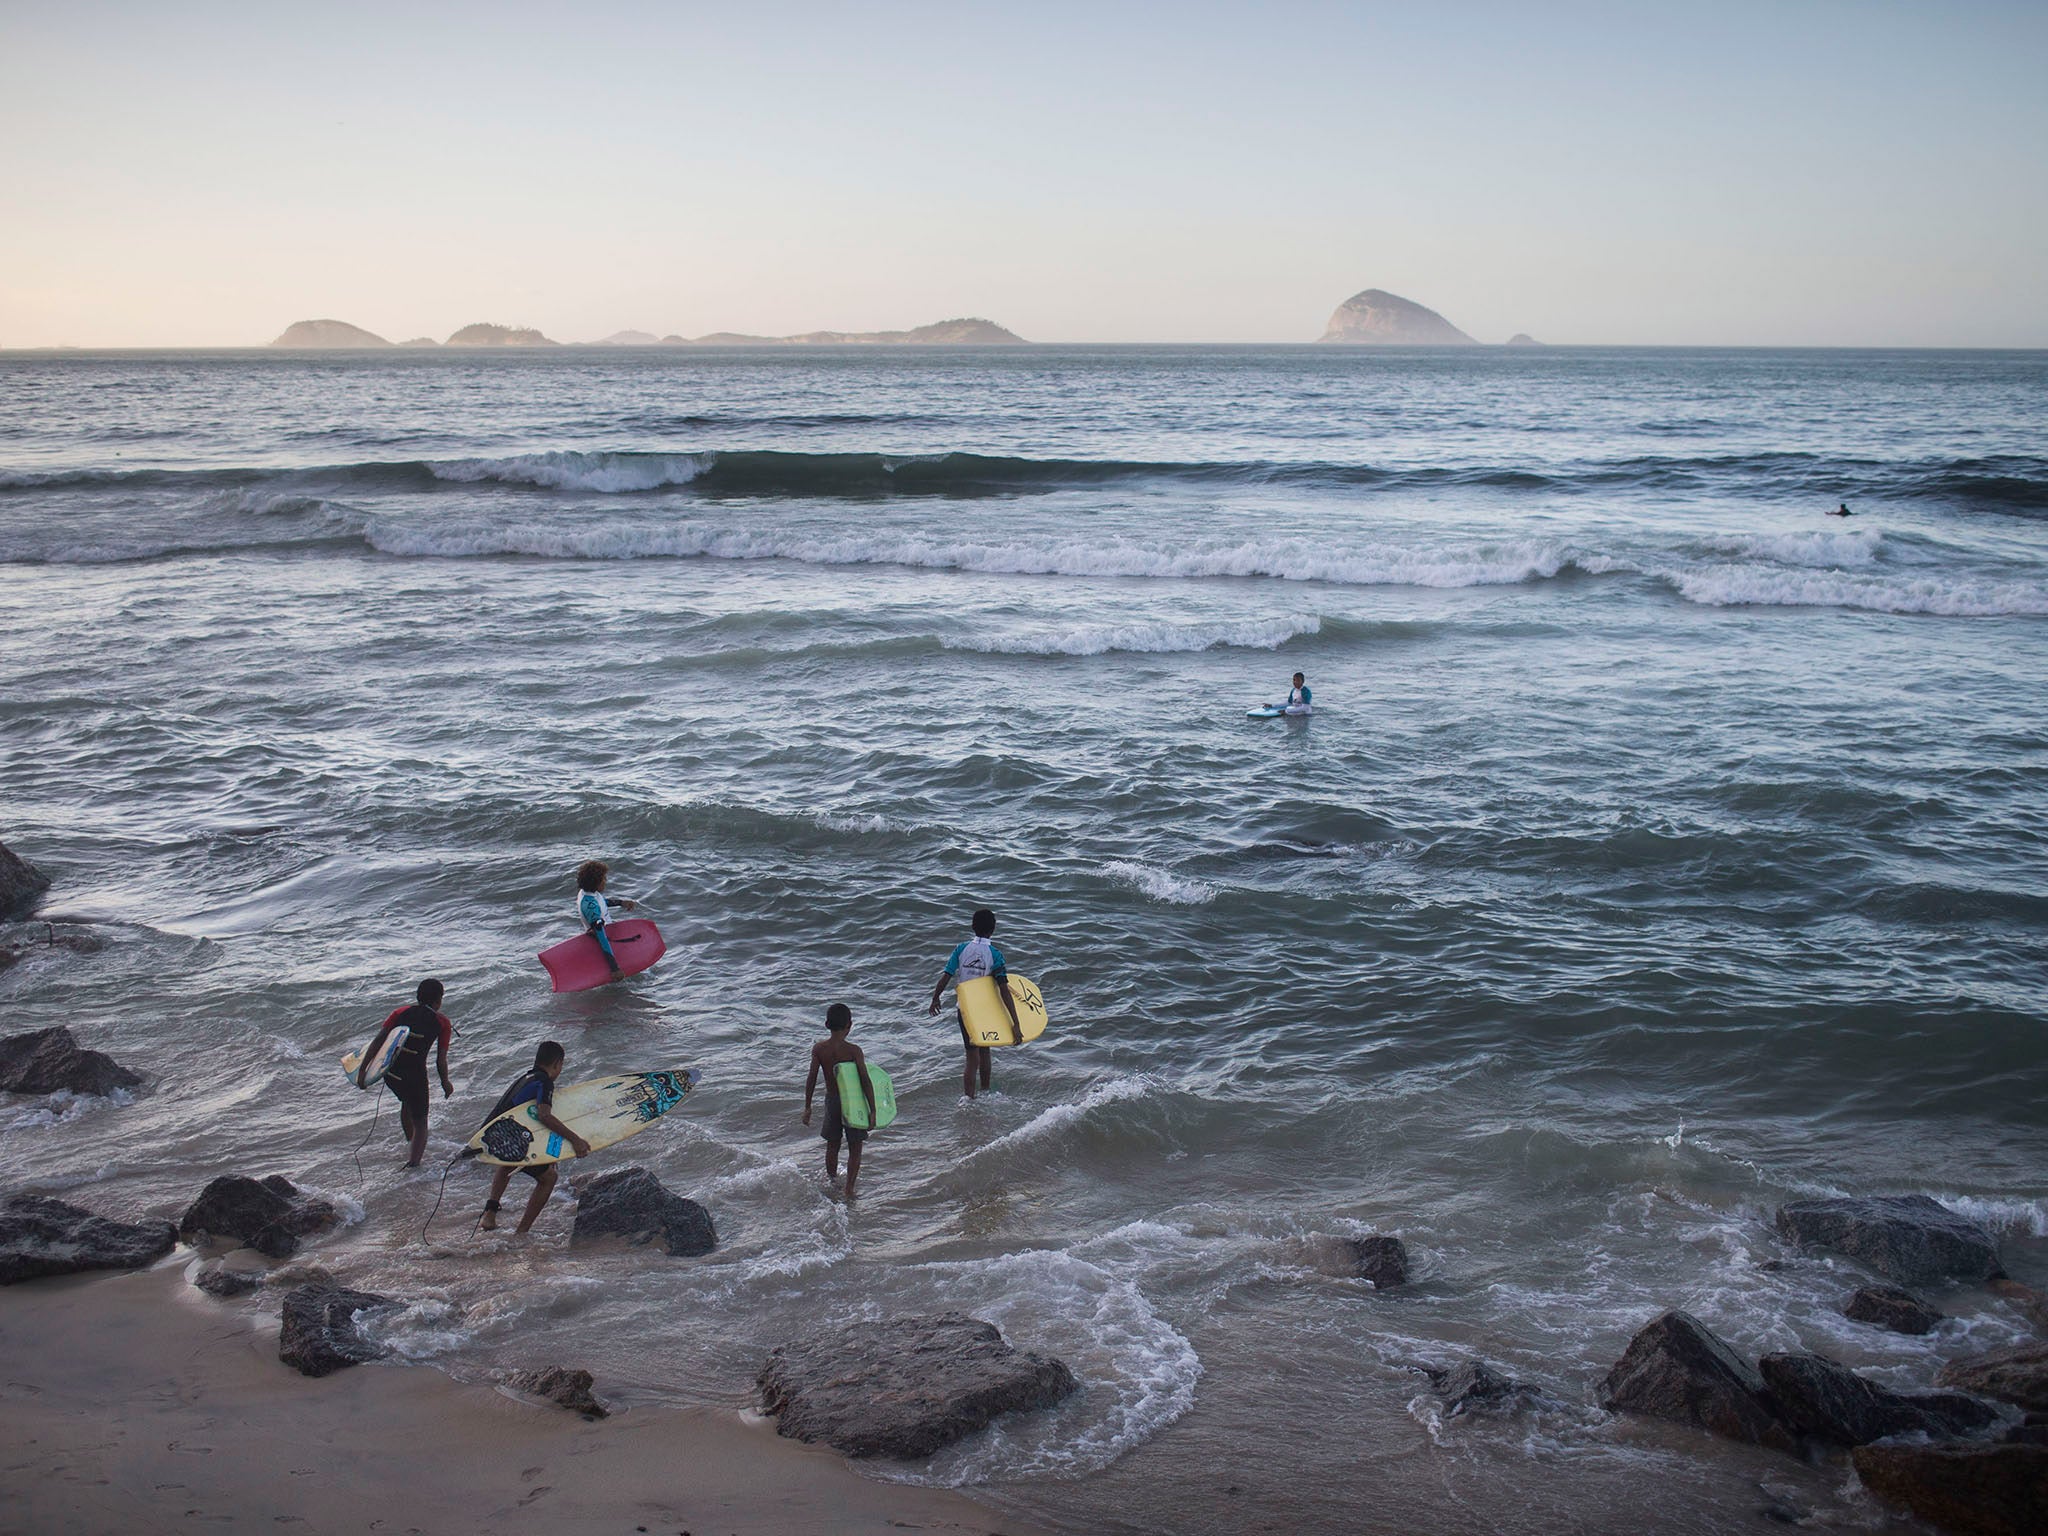 Young surfers from the Rocinha slum enter the water at Sao Conrado beach in Rio de Janeiro, Brazil. Everyday barefoot boys hustle down the inclined alleyways of the Rio de Janeiro slums they call home, surf boards under their arms. They head to nearby Sao